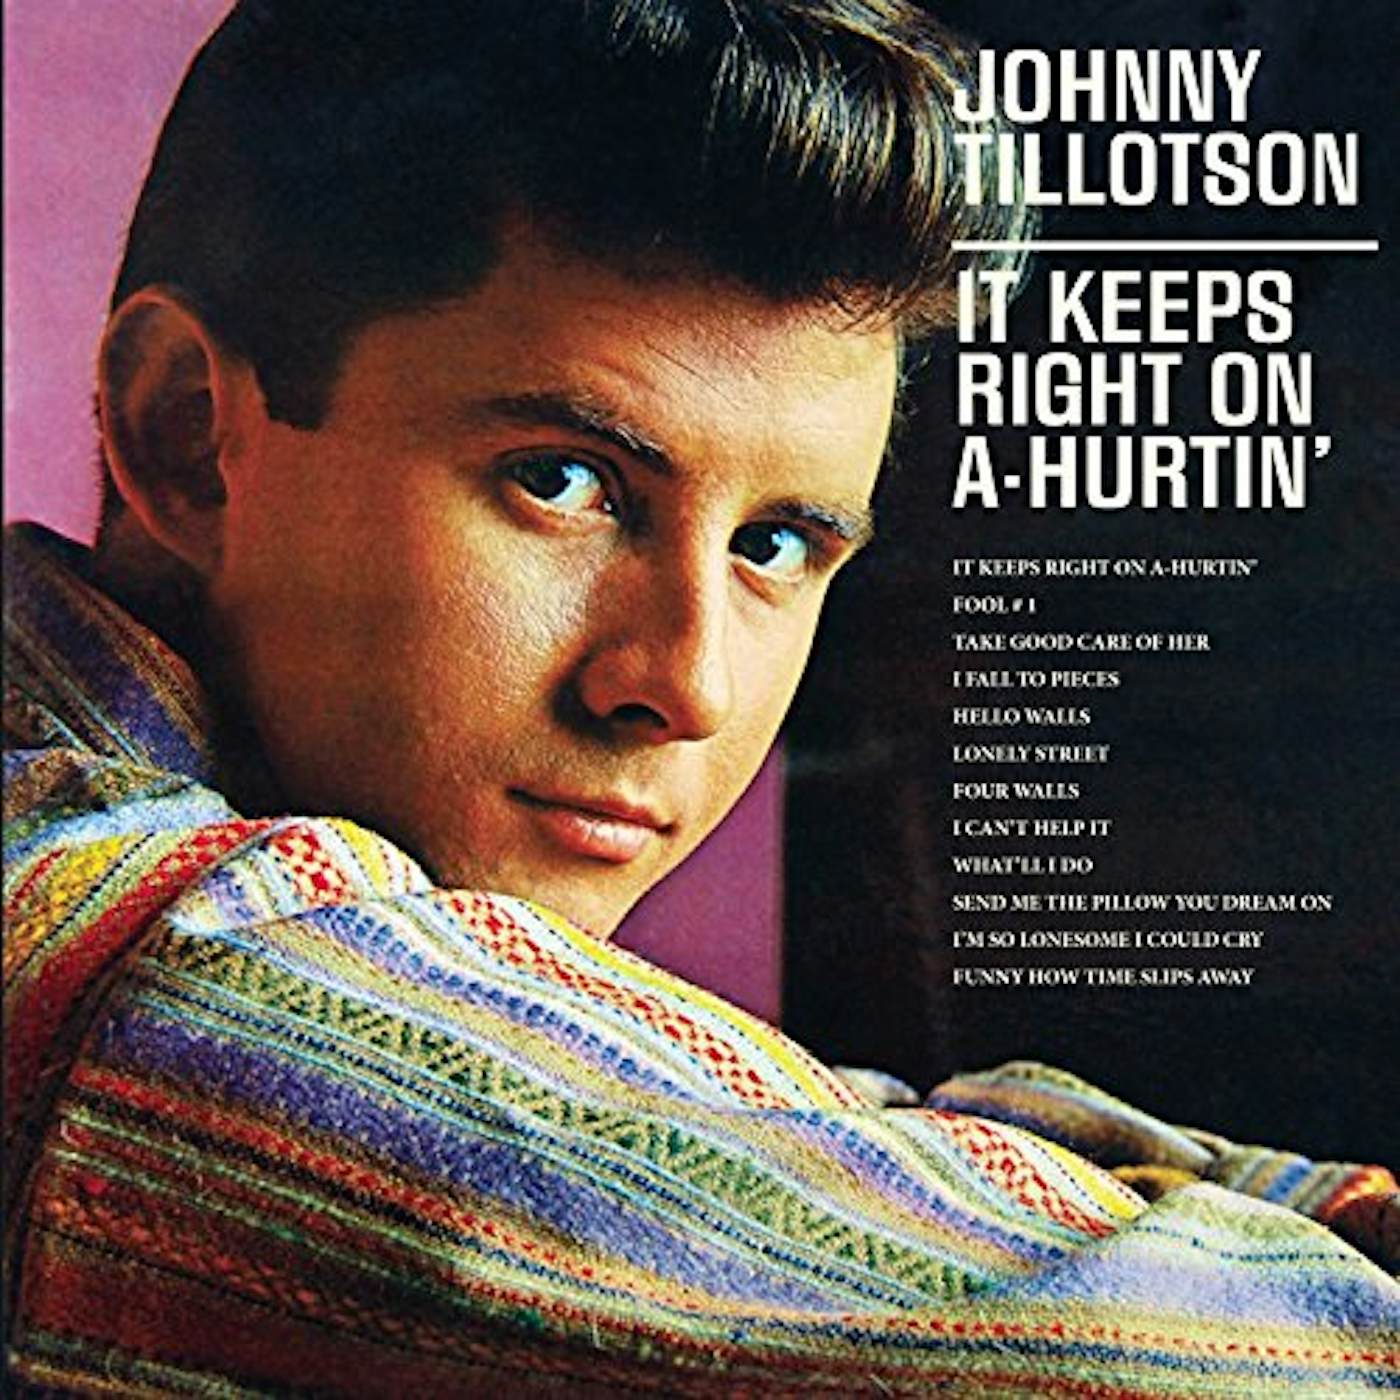 Johnny Tillotson IT KEEPS RIGHT ON A-HURTIN CD